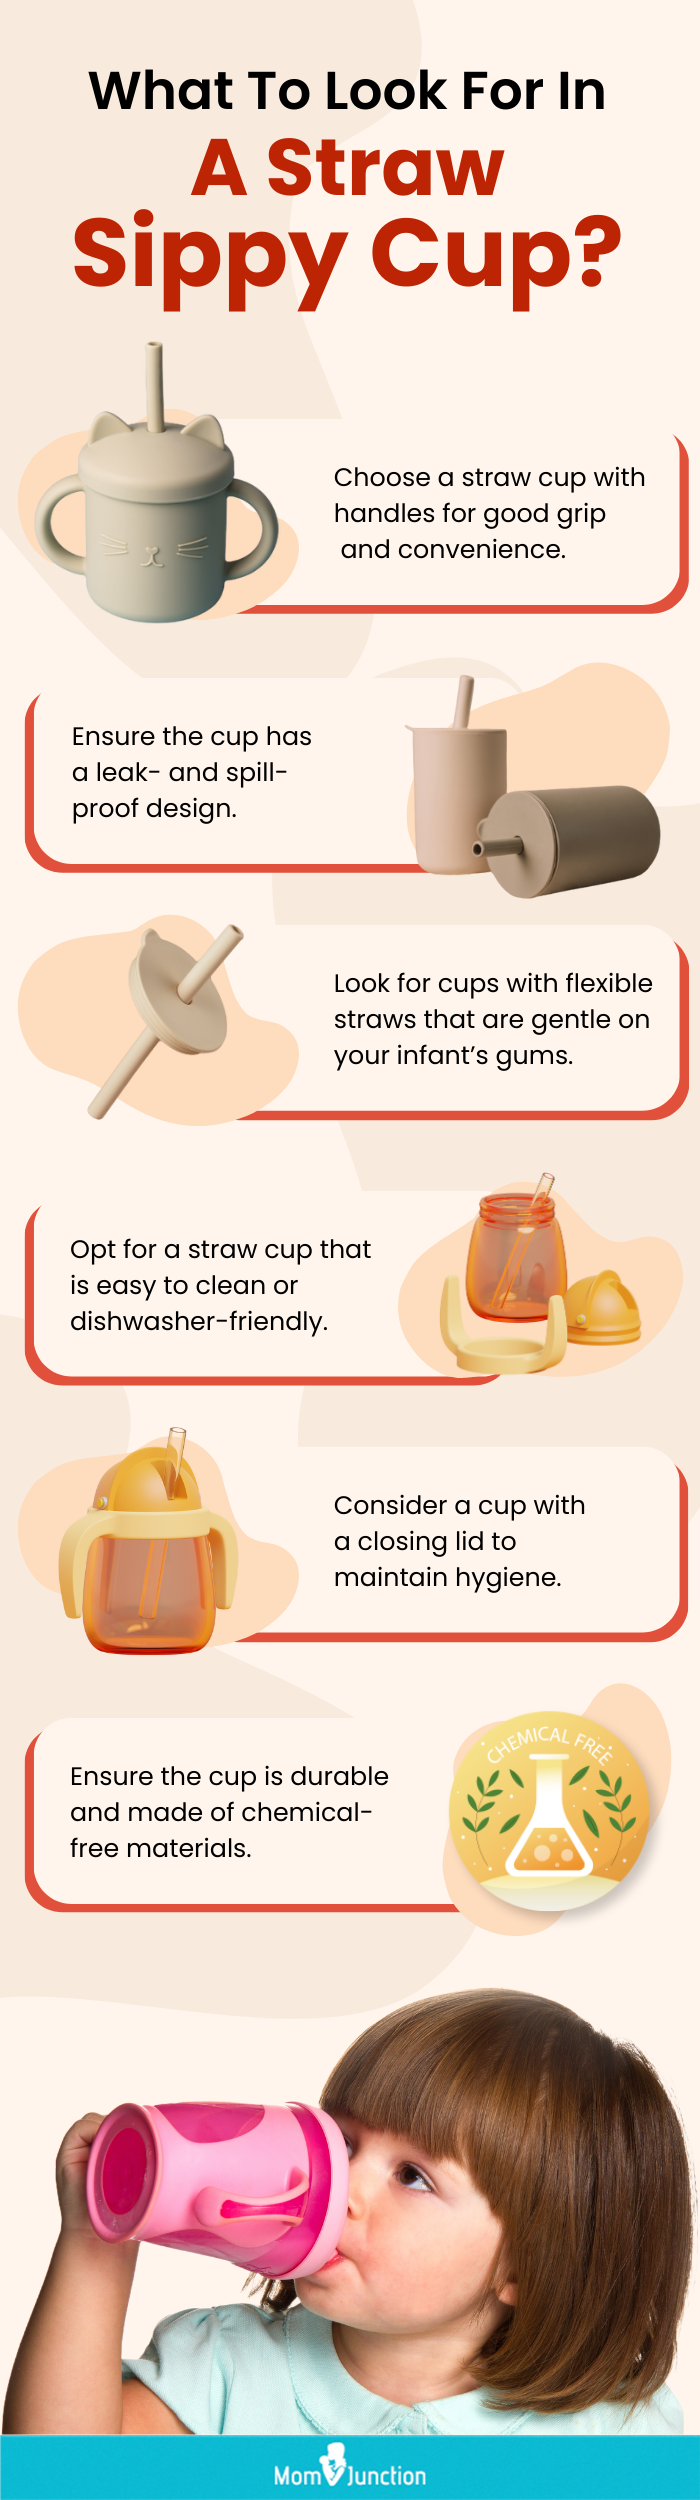 https://cdn2.momjunction.com/wp-content/uploads/2021/09/Infographic-Things-To-Consider-When-Buying-A-Straw-Sippy-Cup.png